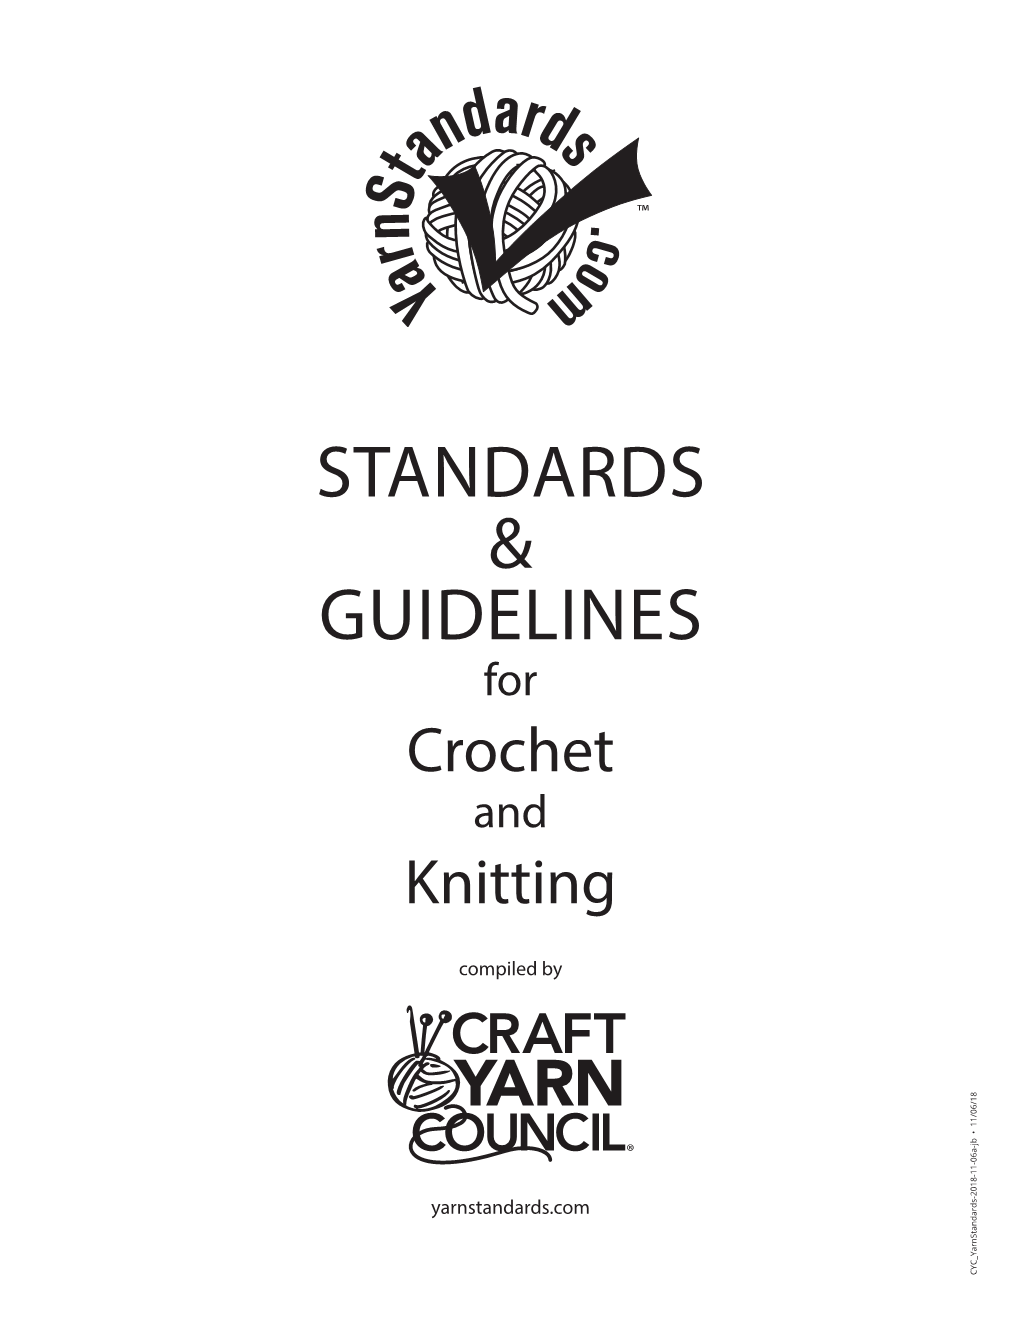 Standards & Guidelines for Knitting and Crochet